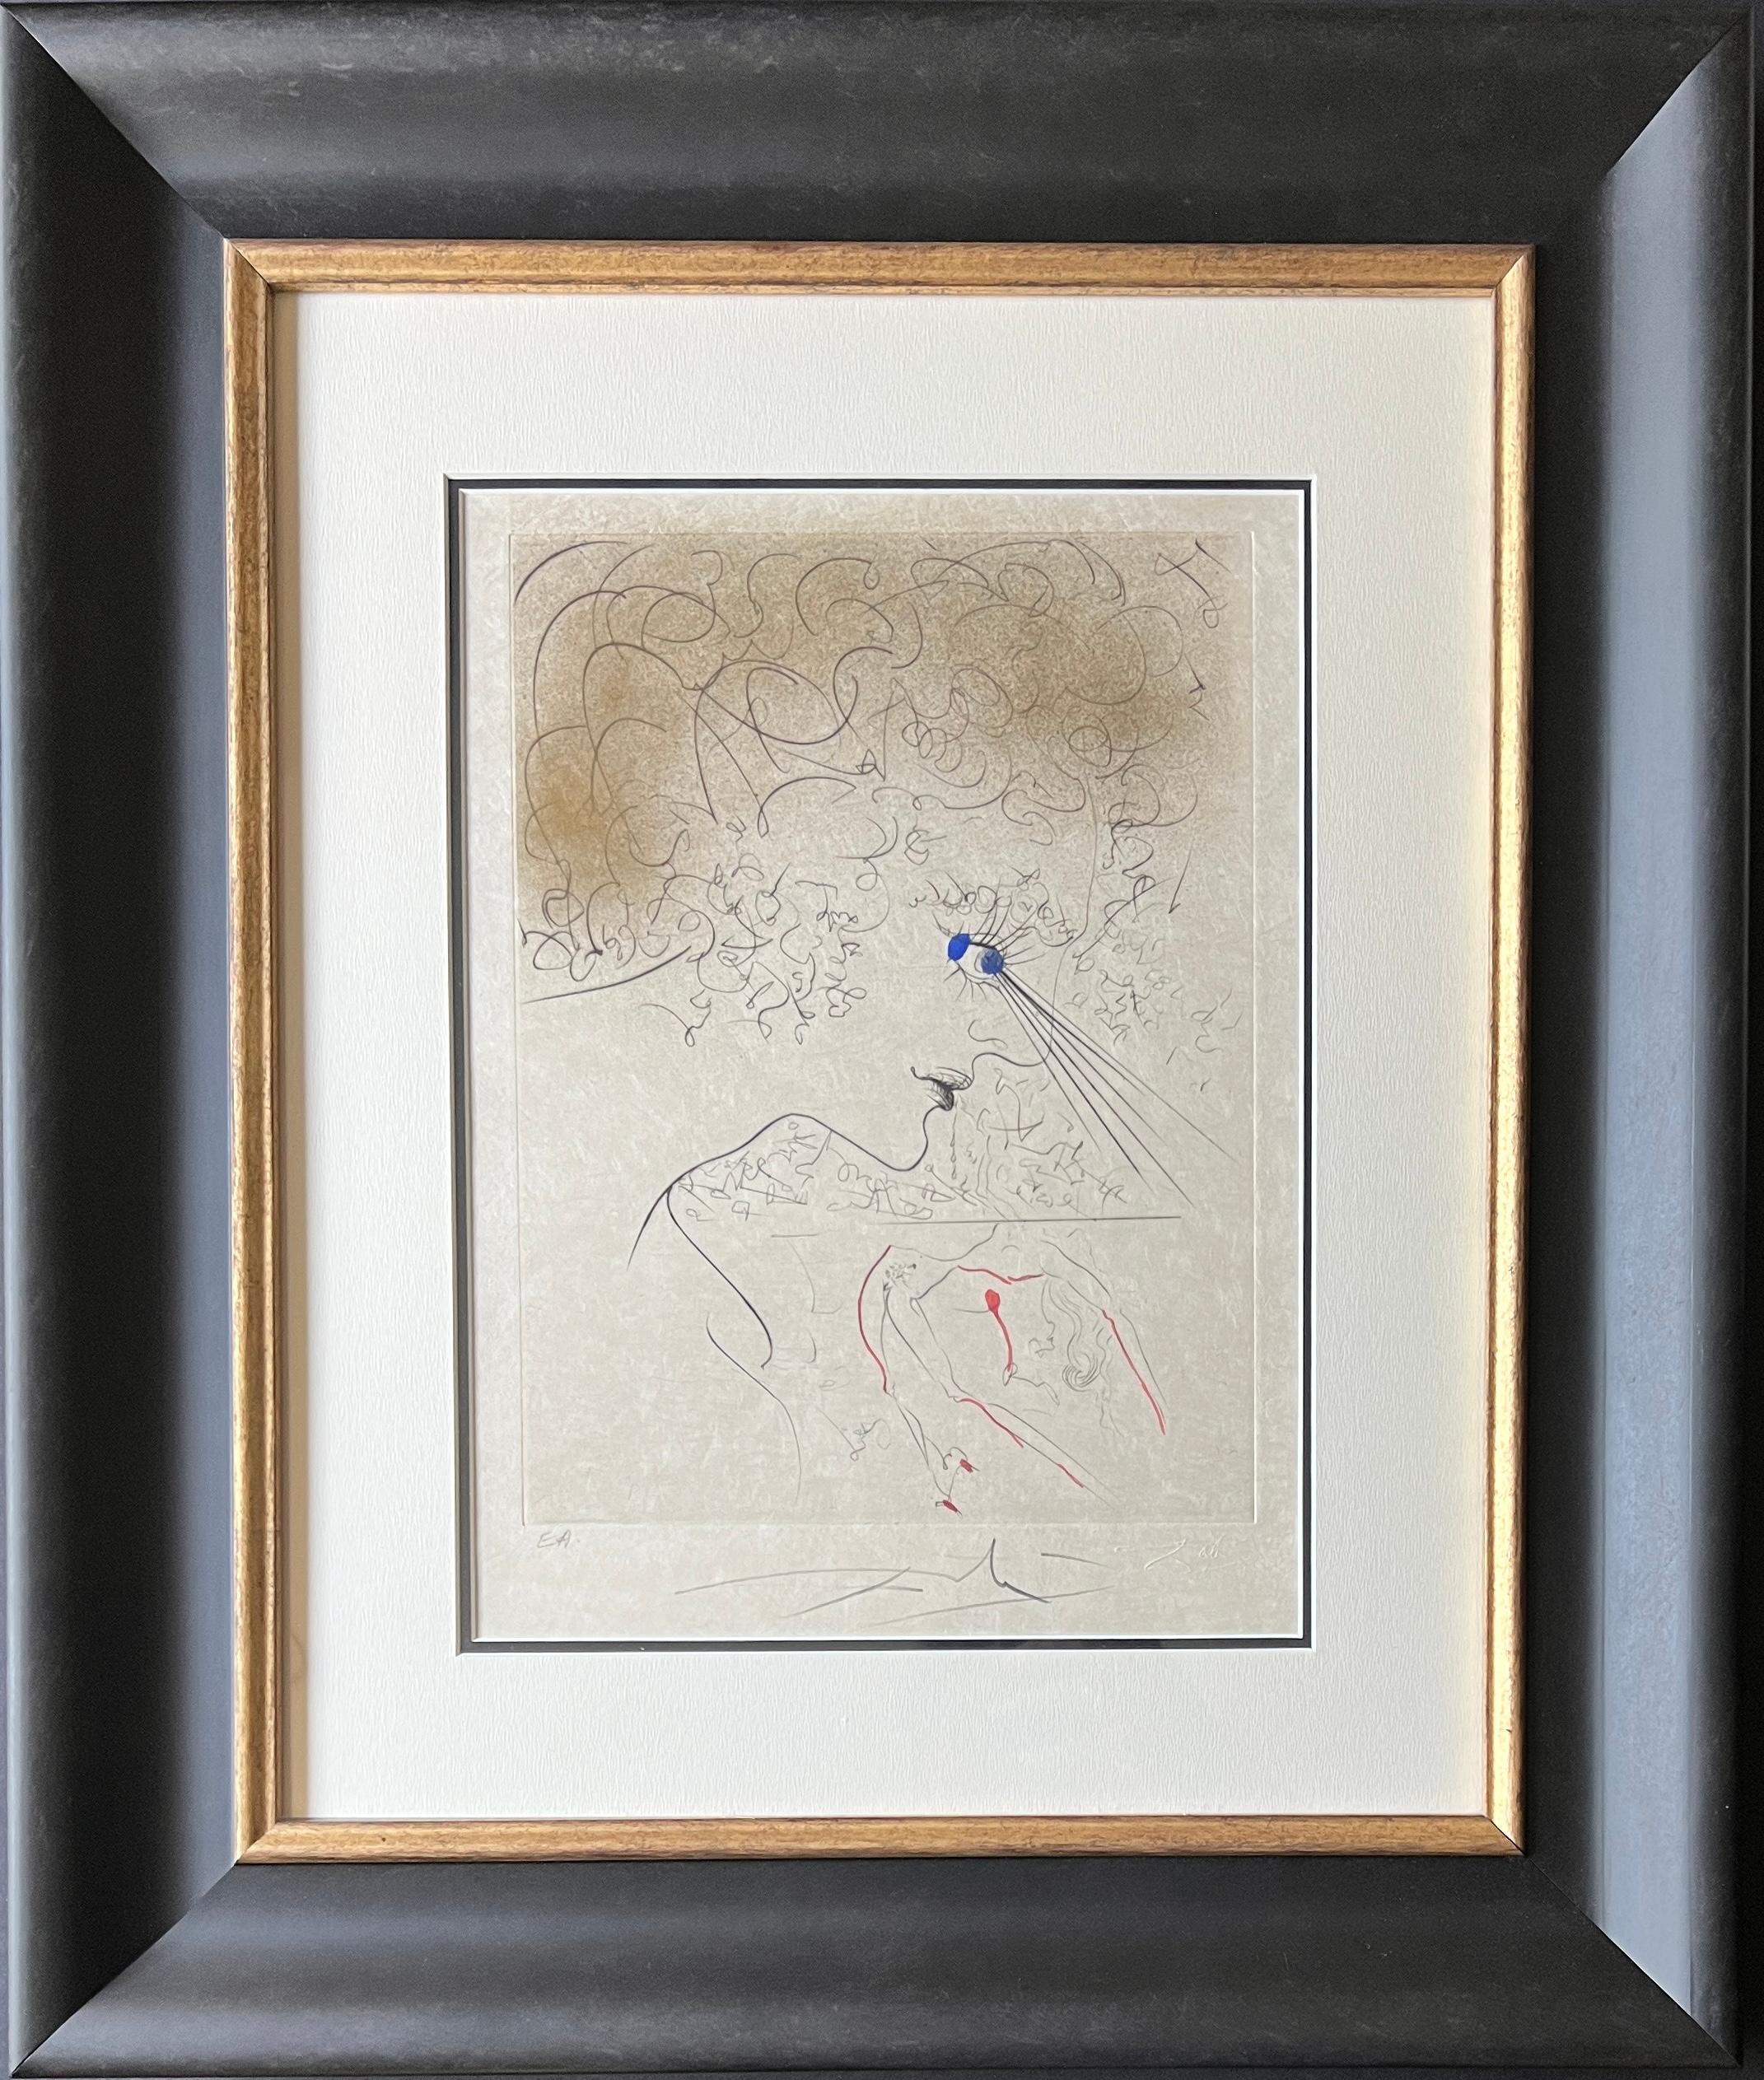 hand watercolored drypoint etching on extremely fine Japanese paper, edited in 1969
limited edition of 145 copies water-colored
, numbered in lower left corner ea ( artist proof )
signed in pencil by artist in lower right corner
paper size: 38.5 x